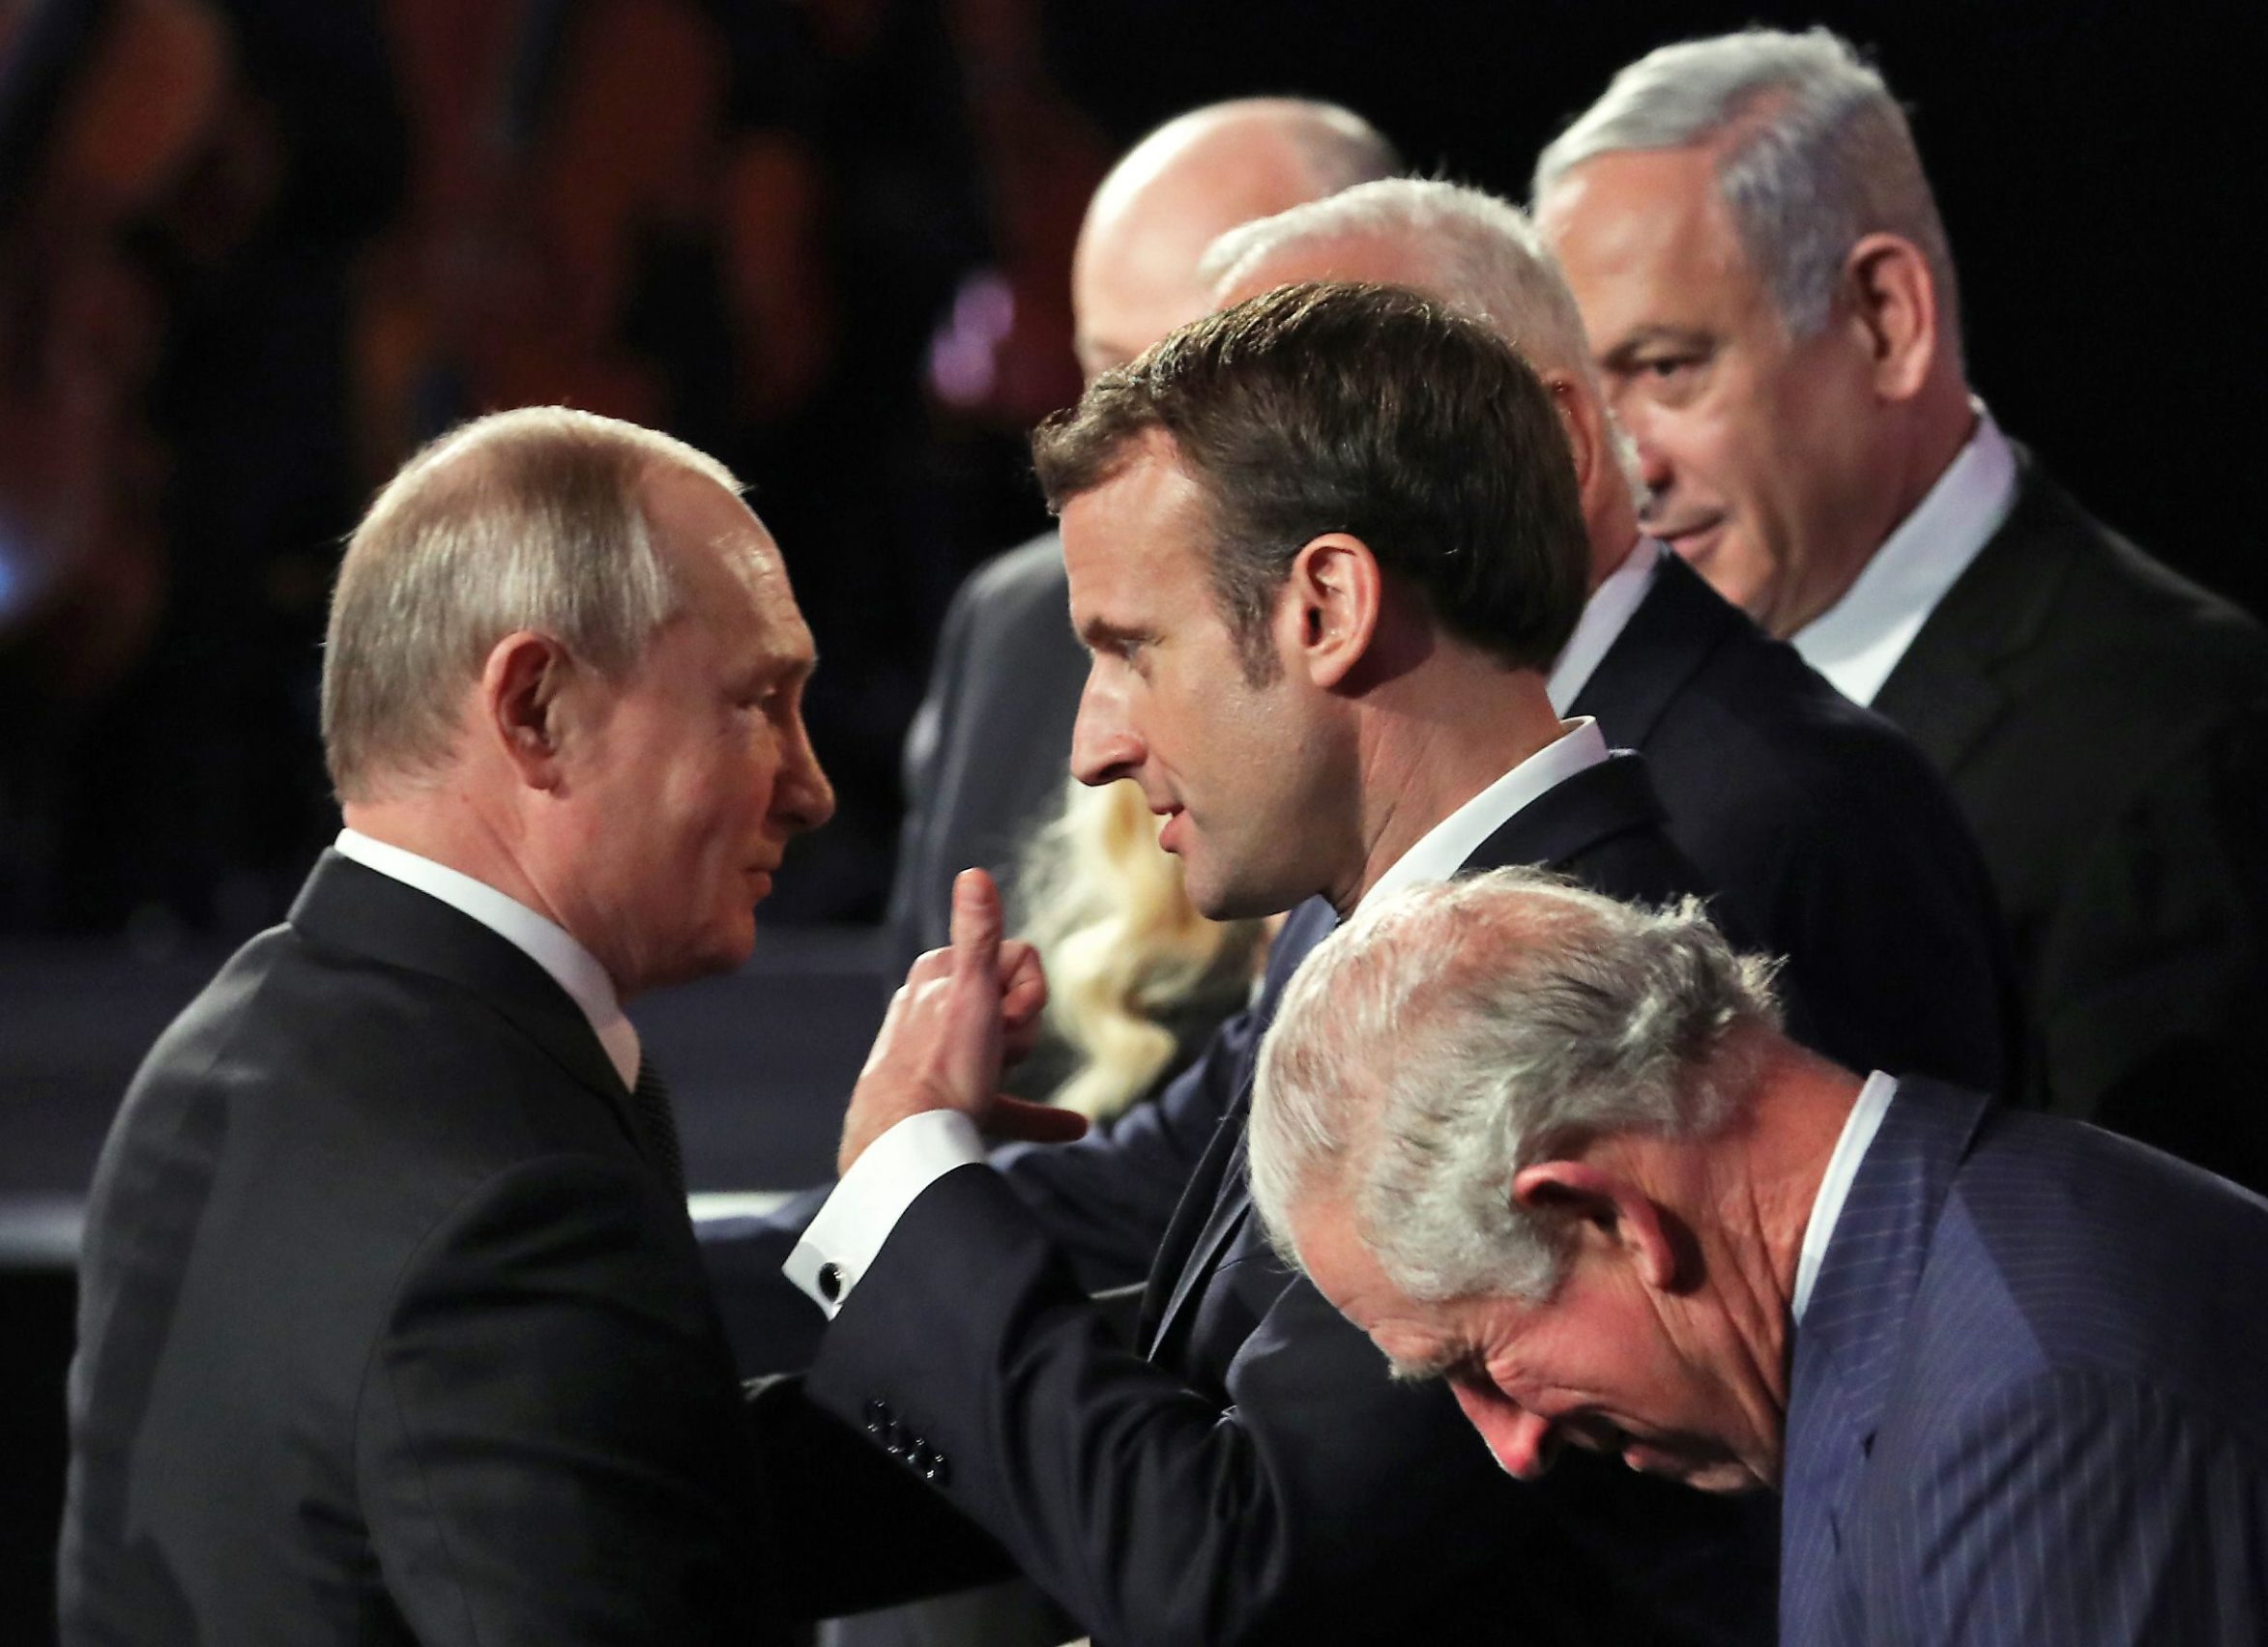 Russian President Vladimir Putin (L) speaks with French Prsident Emmanuel Macron (C) as Britain's Prince Charles (C-down) looks on during the Fifth World Holocaust Forum at the Yad Vashem Holocaust memorial museum in Jerusalem on January 23, 2020. - World leaders travelled to Israel this week to mark 75 years since the Red Army liberated Auschwitz, the extermination camp where the Nazis killed over a million Jews. (Photo by Abir SULTAN / POOL / AFP)